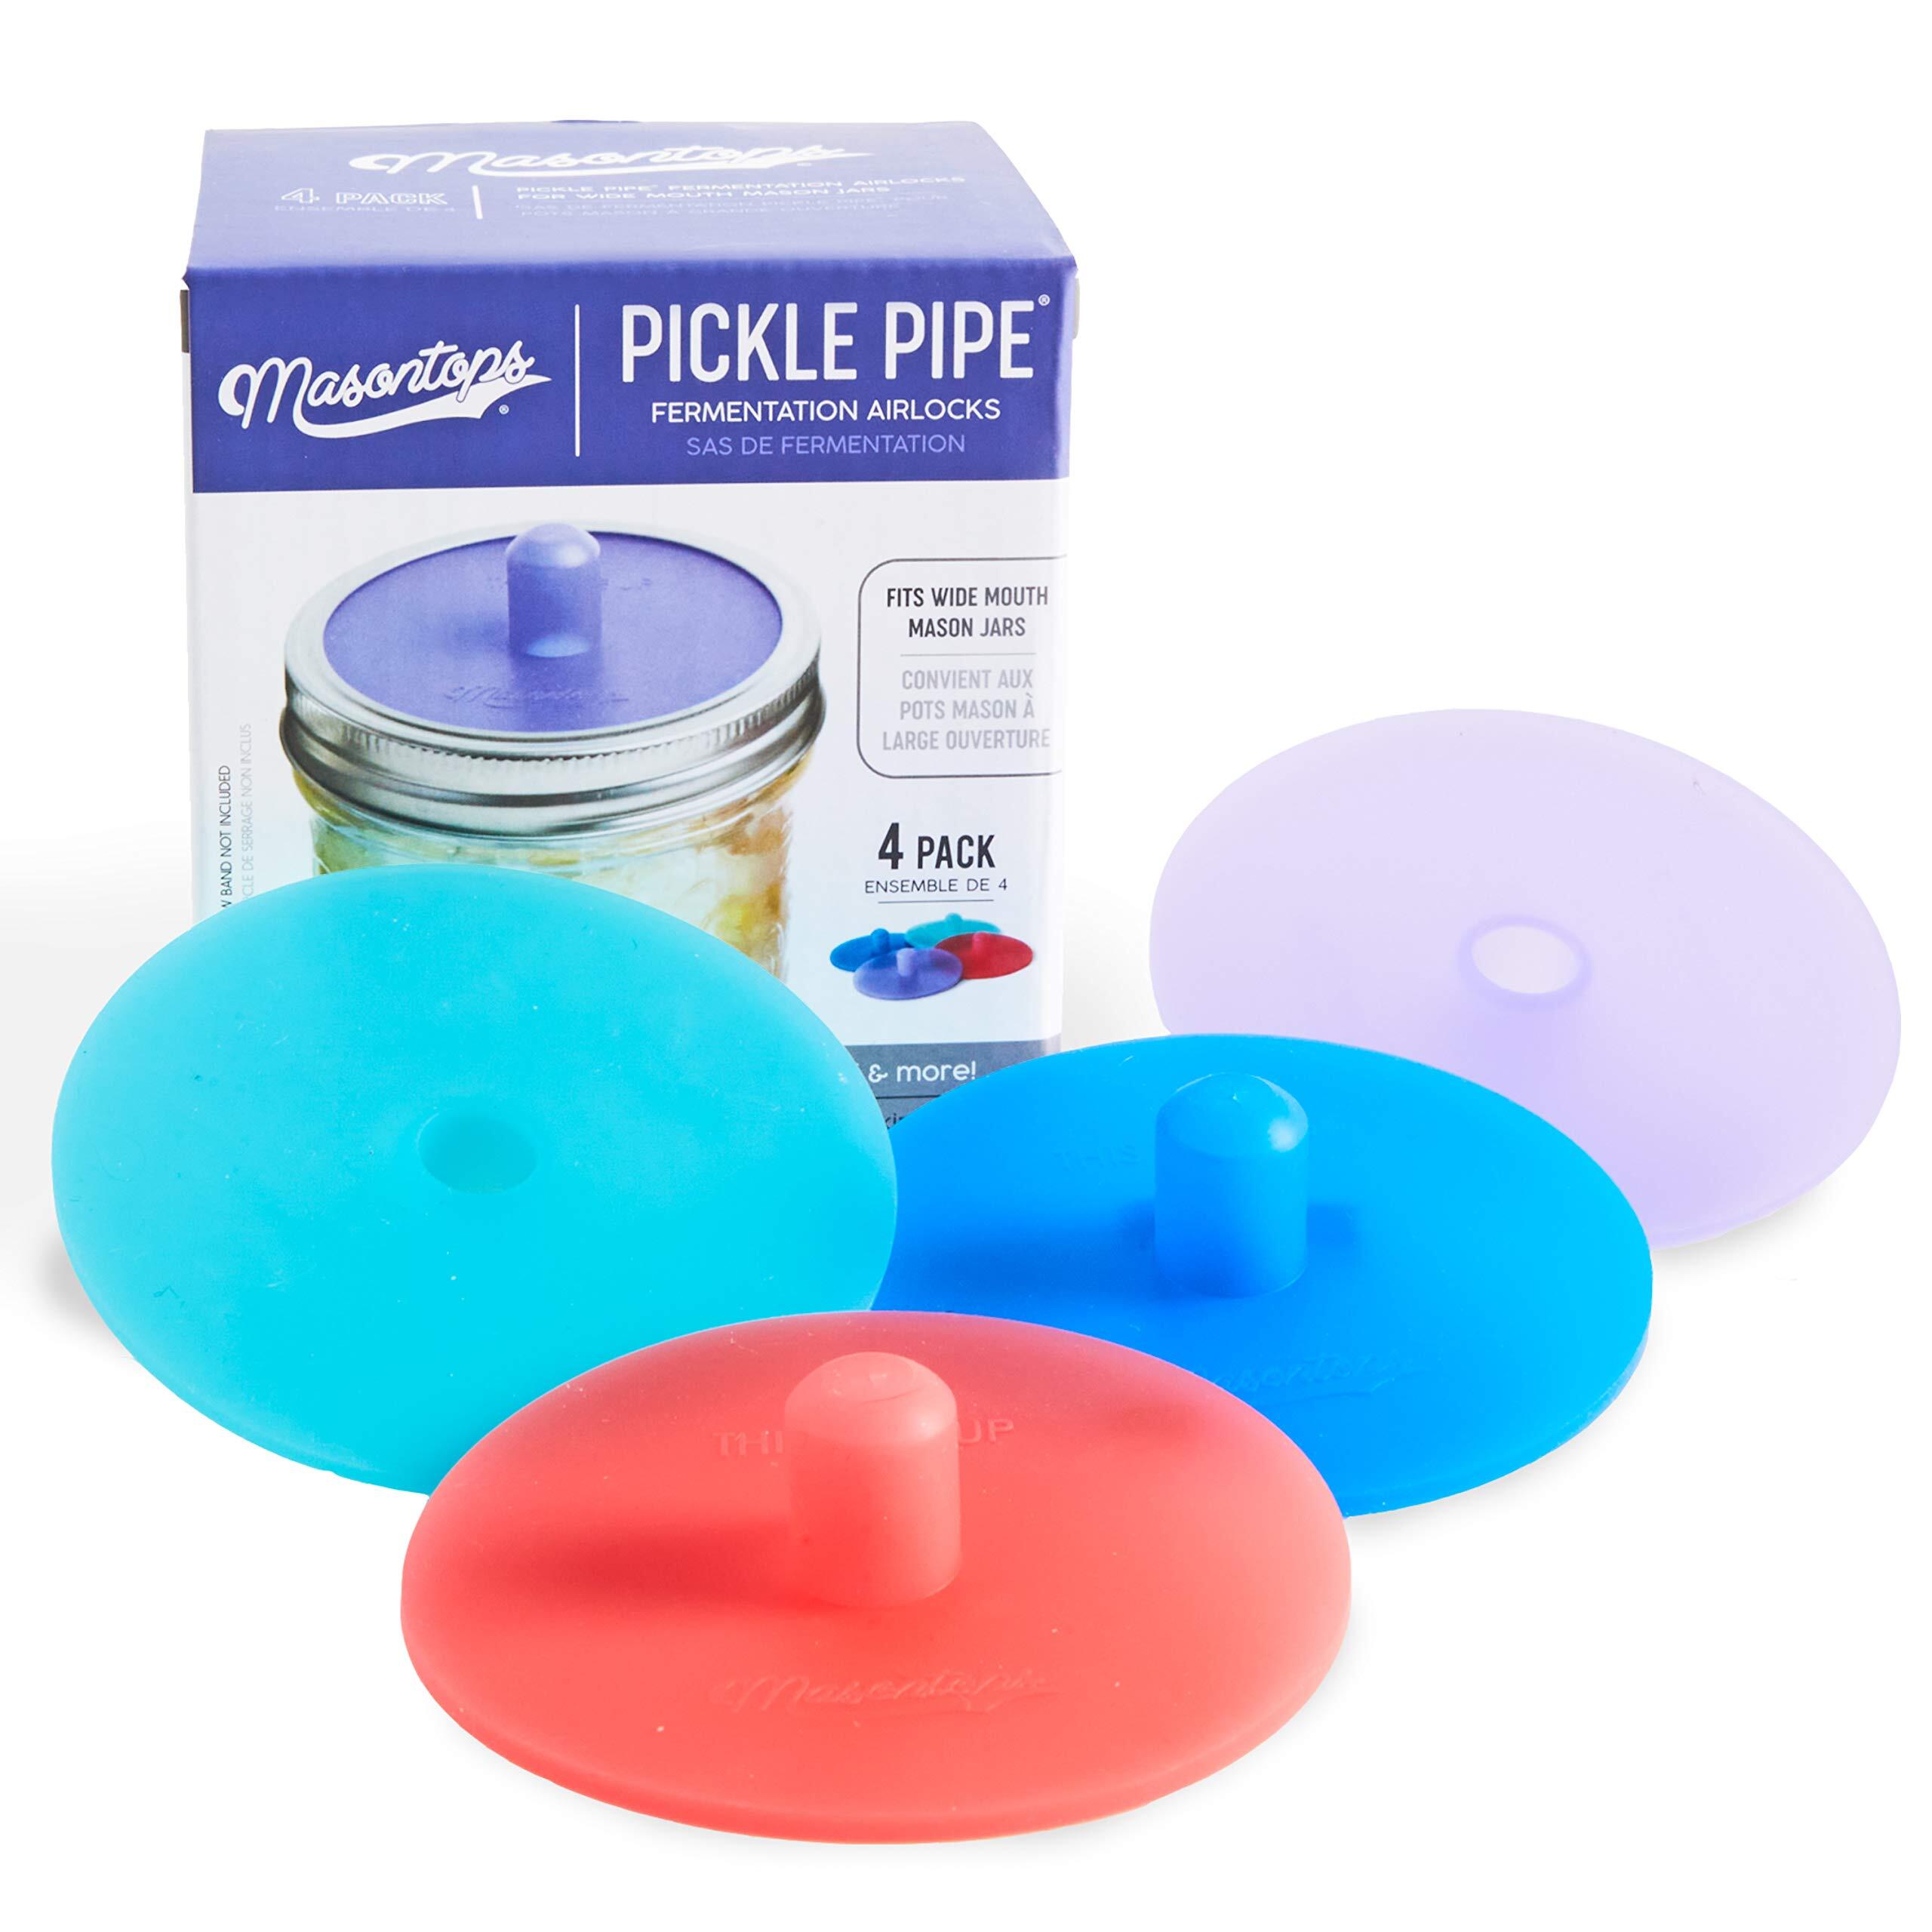 Pickle Pipe Silicon Airlock - 4 pack